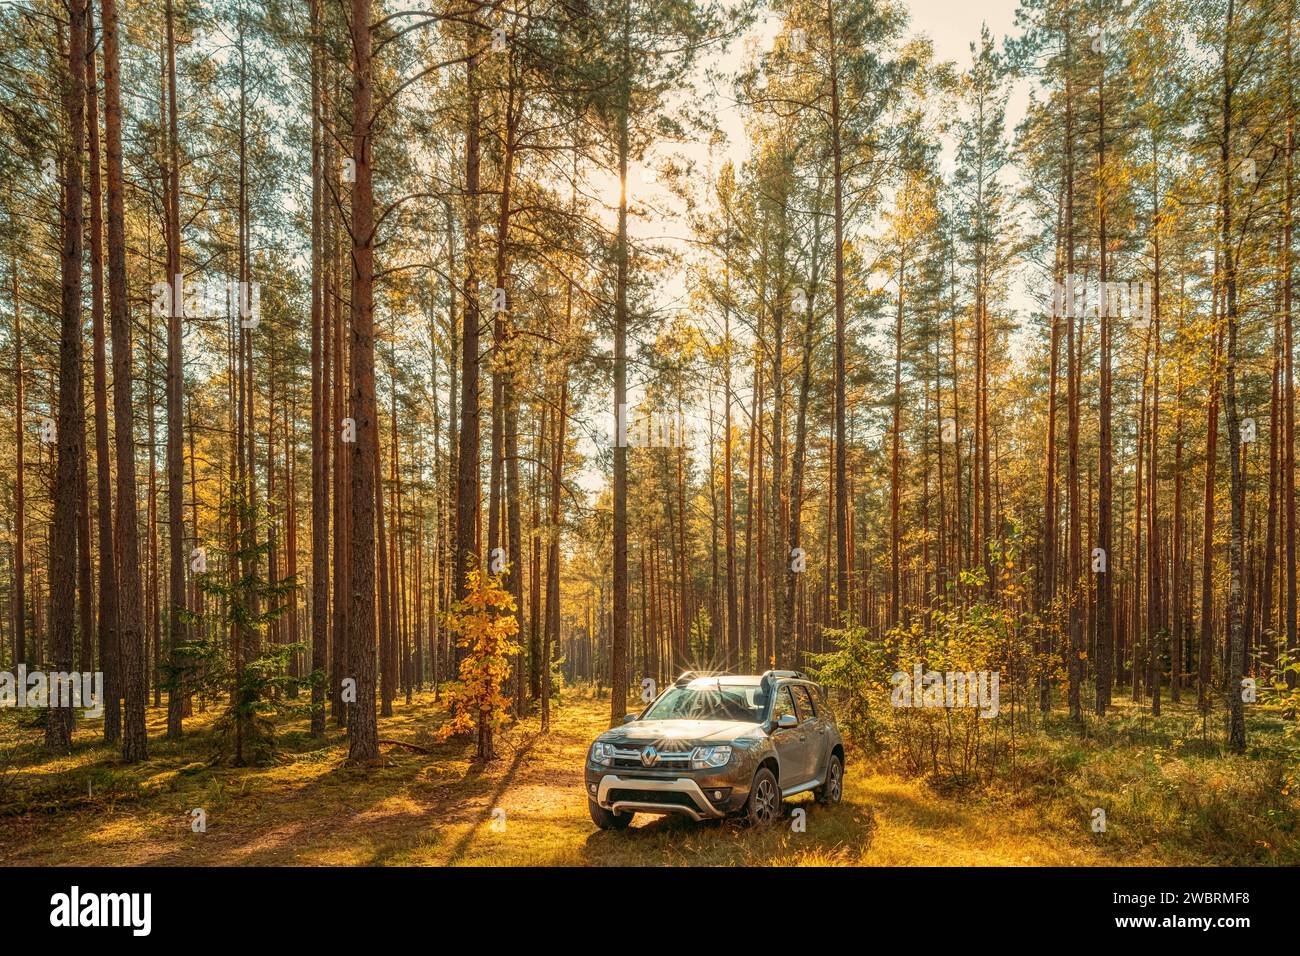 Car Renault Duster SUV in autumn forest landscape. Duster produced jointly by French manufacturer Renault and its Romanian subsidiary Dacia. Stock Photo